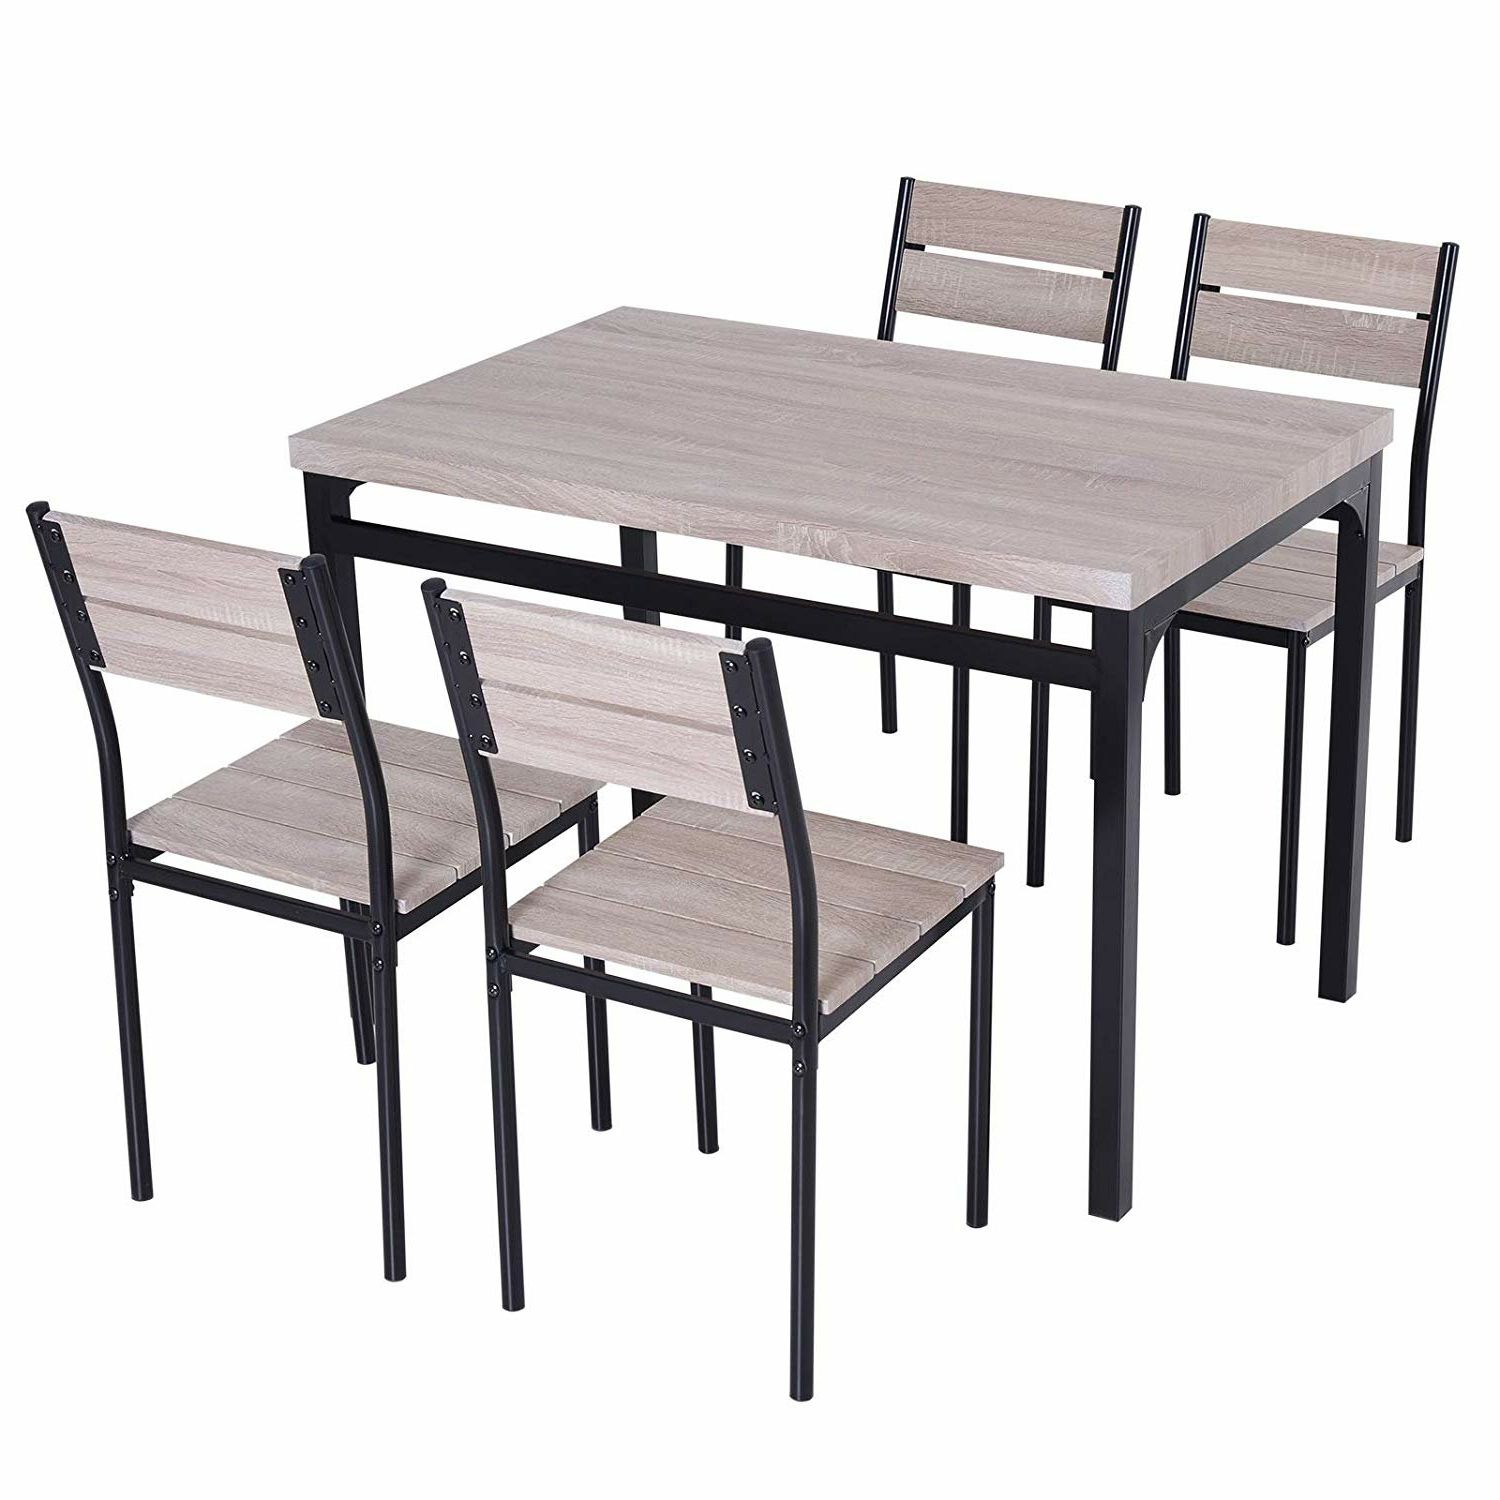 Most Recent Emmeline 5 Piece Breakfast Nook Dining Sets Inside Sirois 5 Piece Dining Set (View 6 of 20)